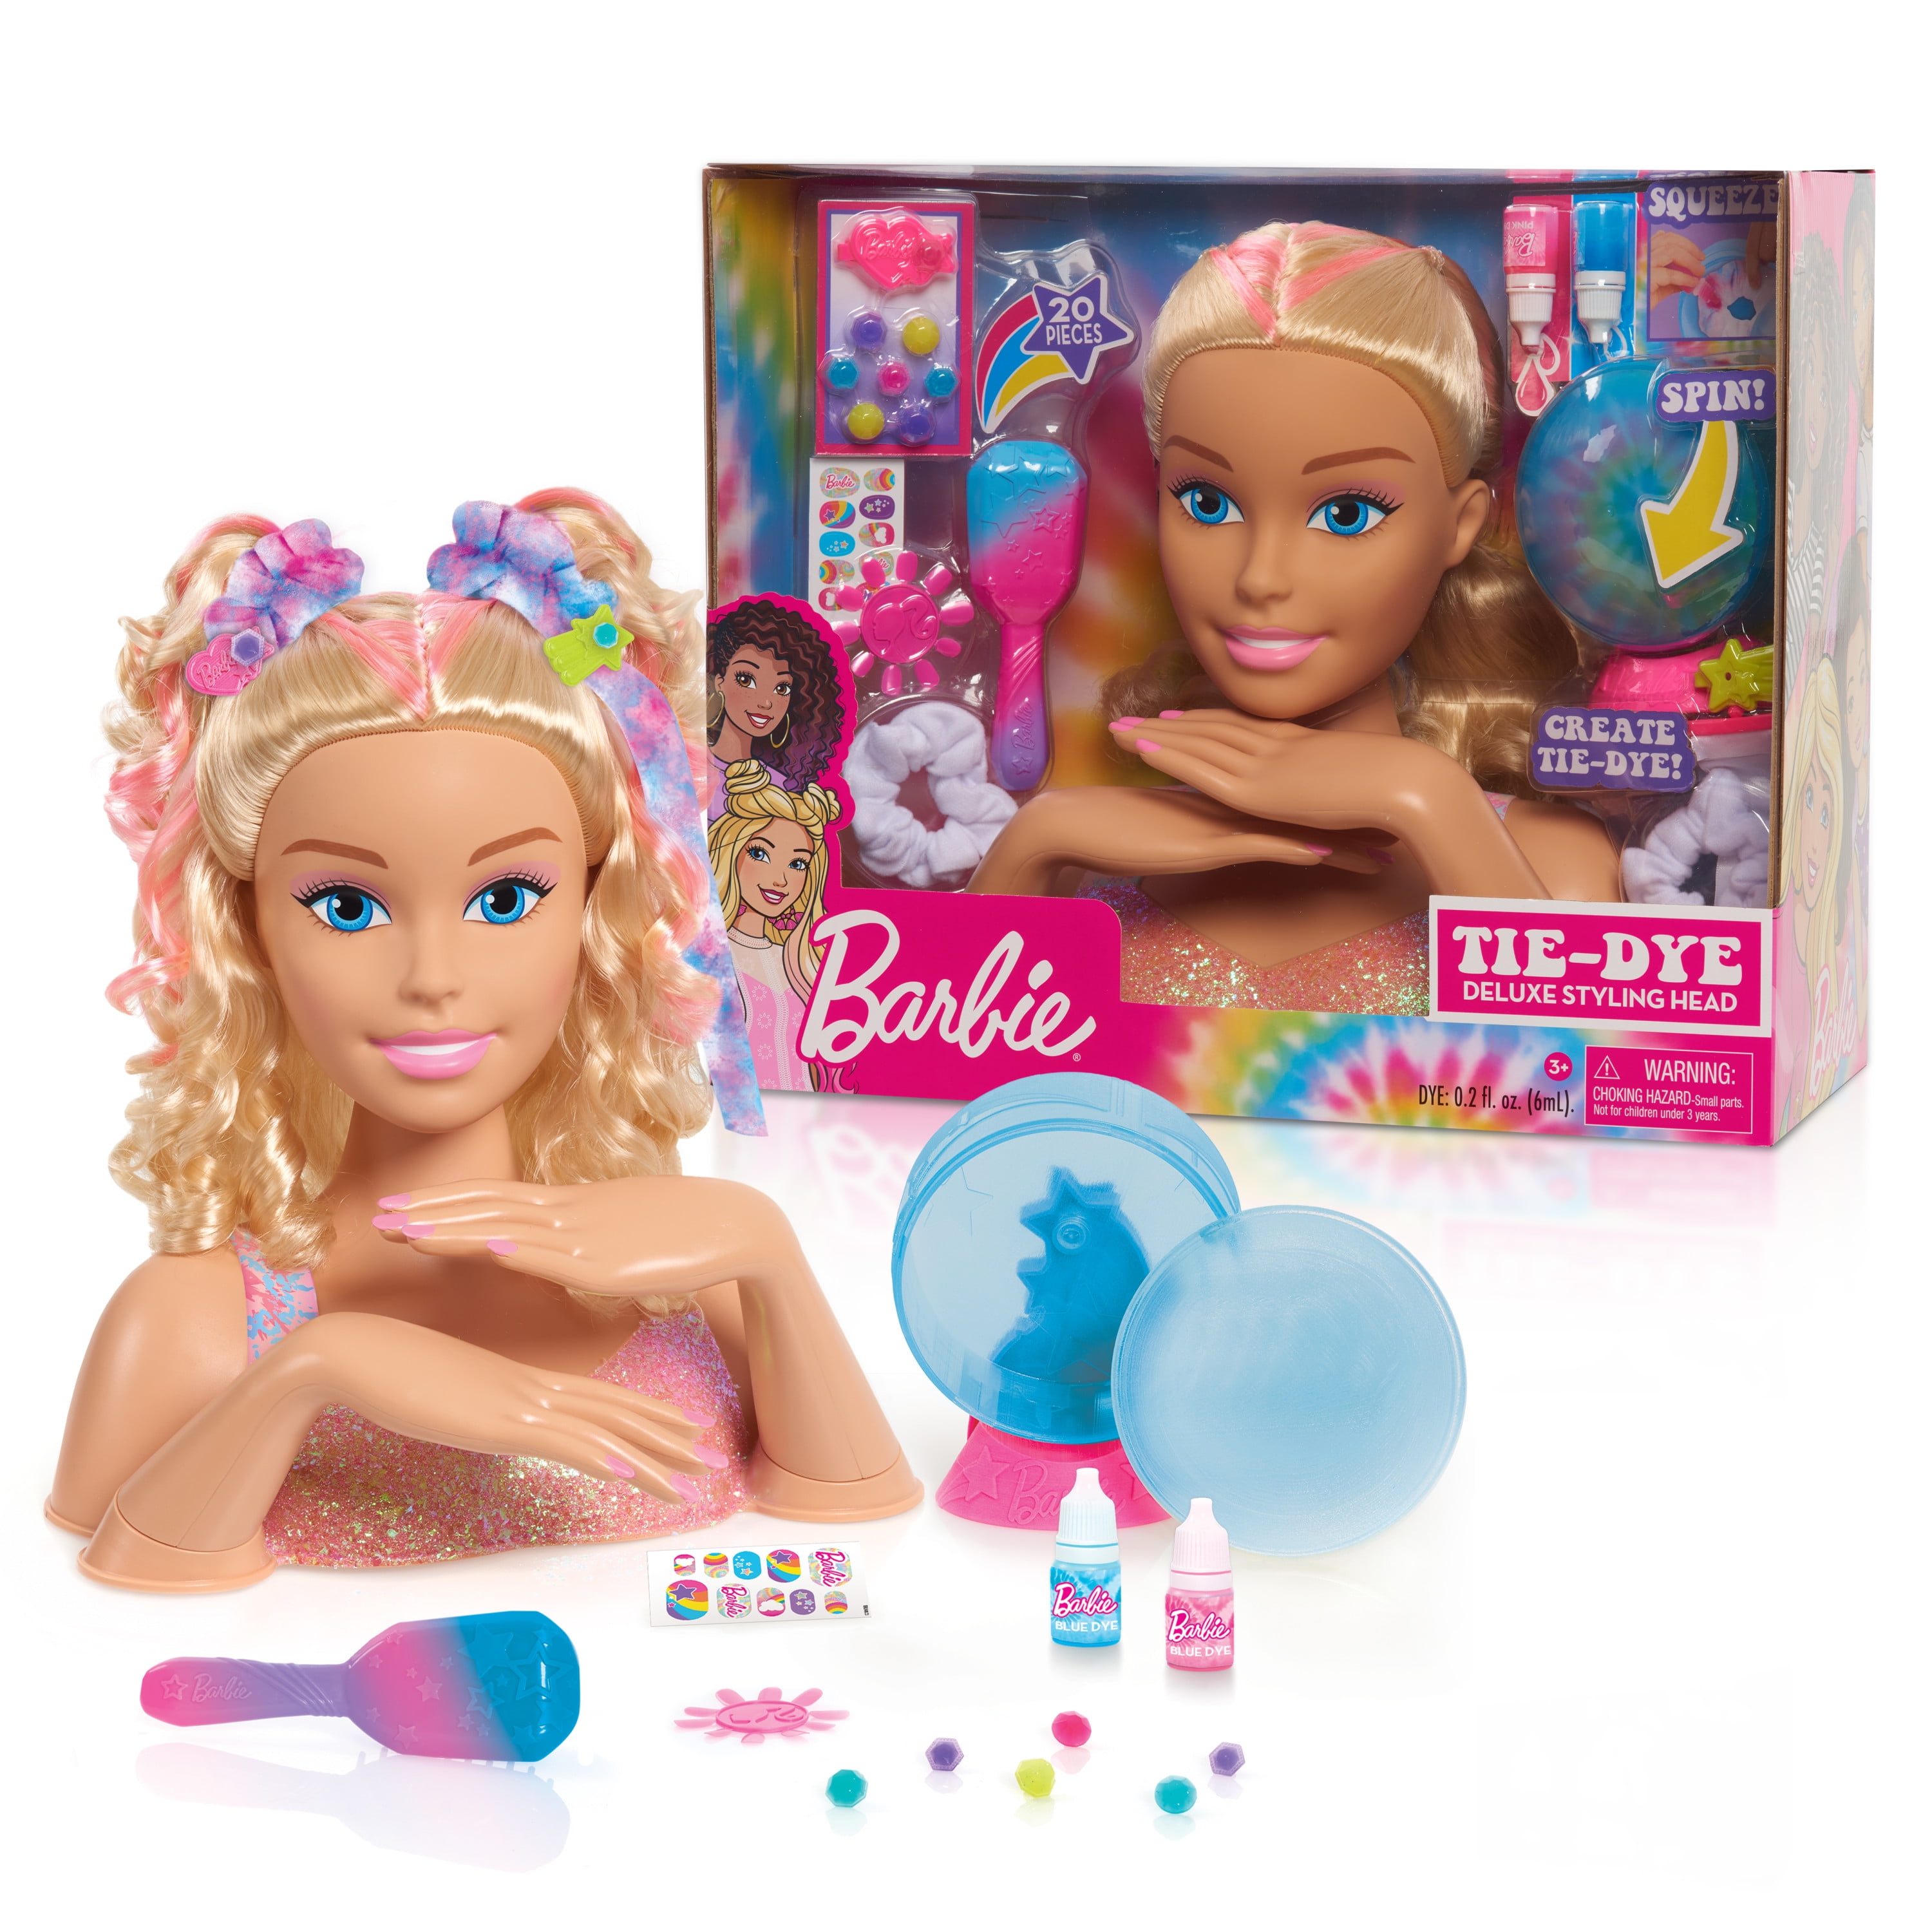 Motel conservative Trickle Barbie Tie-Dye Deluxe 21-Piece Styling Head, Blonde Hair, Includes 2  Non-Toxic Dye Colors, Kids Toys for Ages 3 Up, Gifts and Presents -  Walmart.com